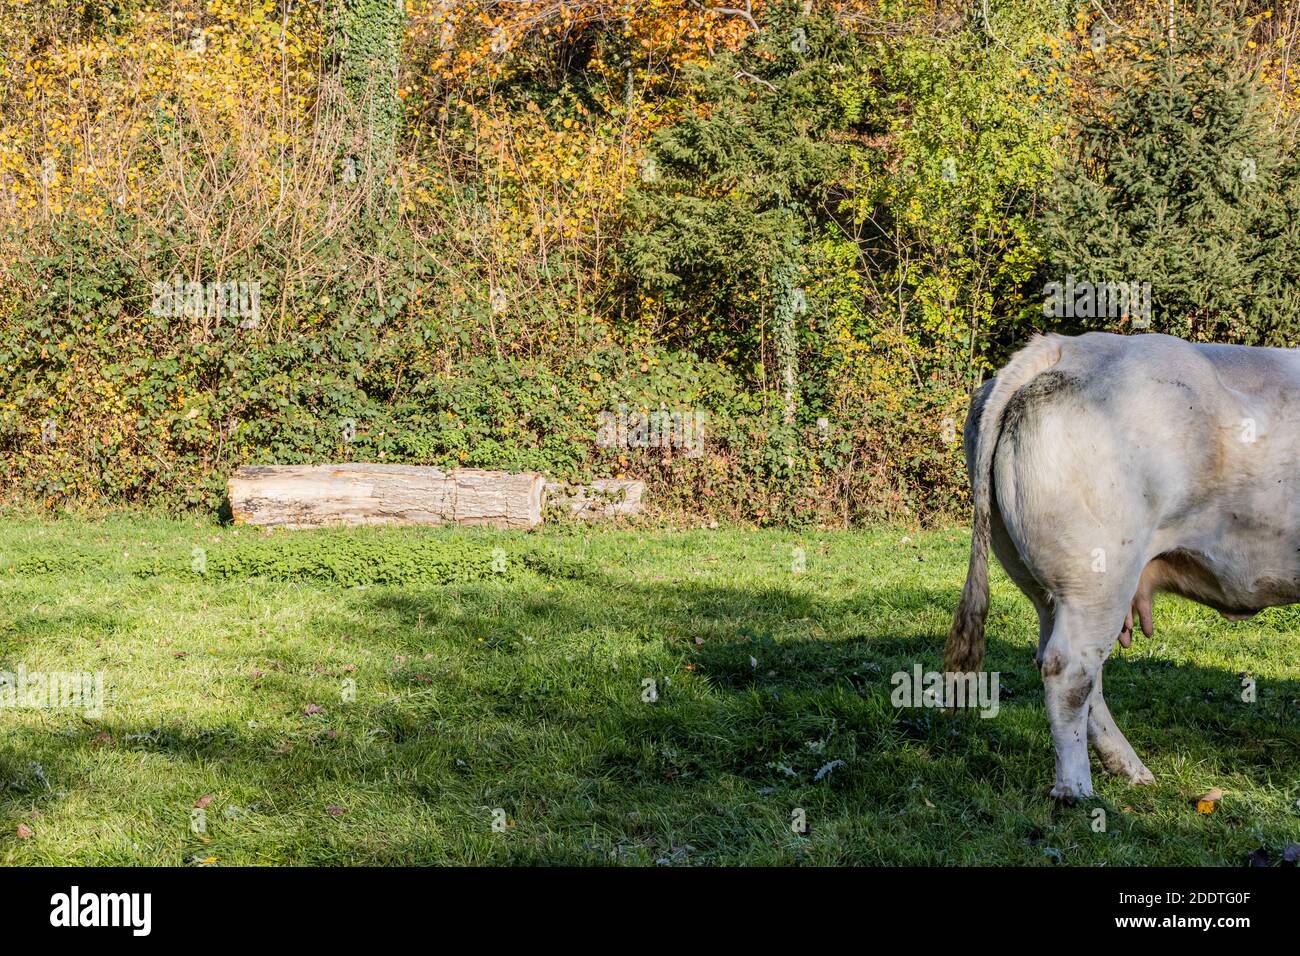 Agricultural farm with green grass with the buttocks, dirty tail and part of the back of a white grayish dairy cow, sunny day in the Dutch countryside Stock Photo